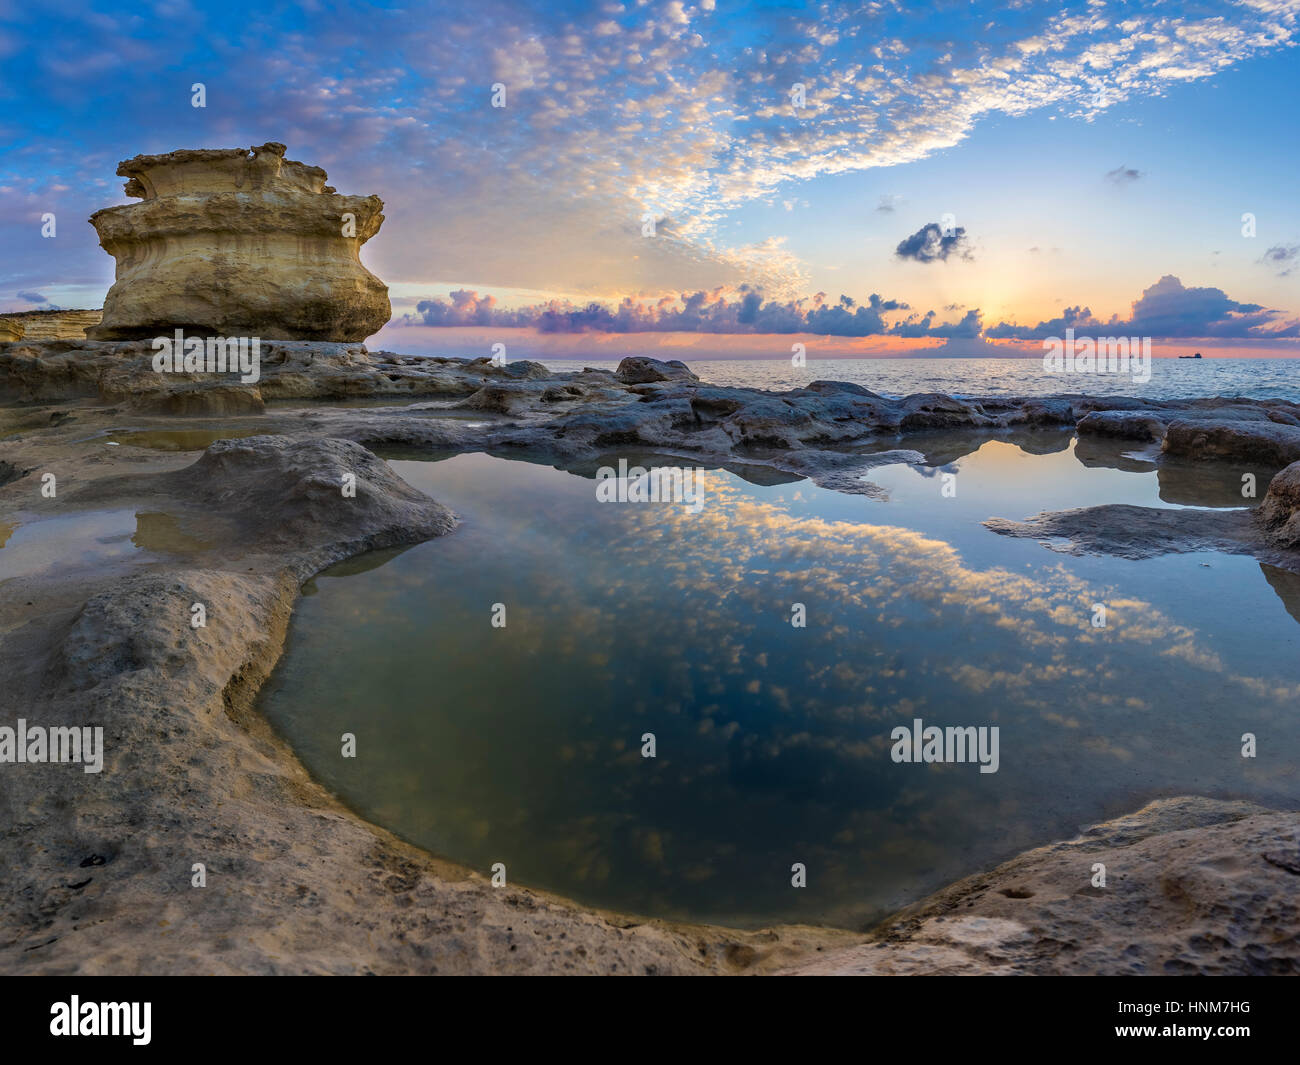 Malta - Sunrise at St.Peter's Pool with huge rocks of Delimara and reflections of the sky and clouds Stock Photo